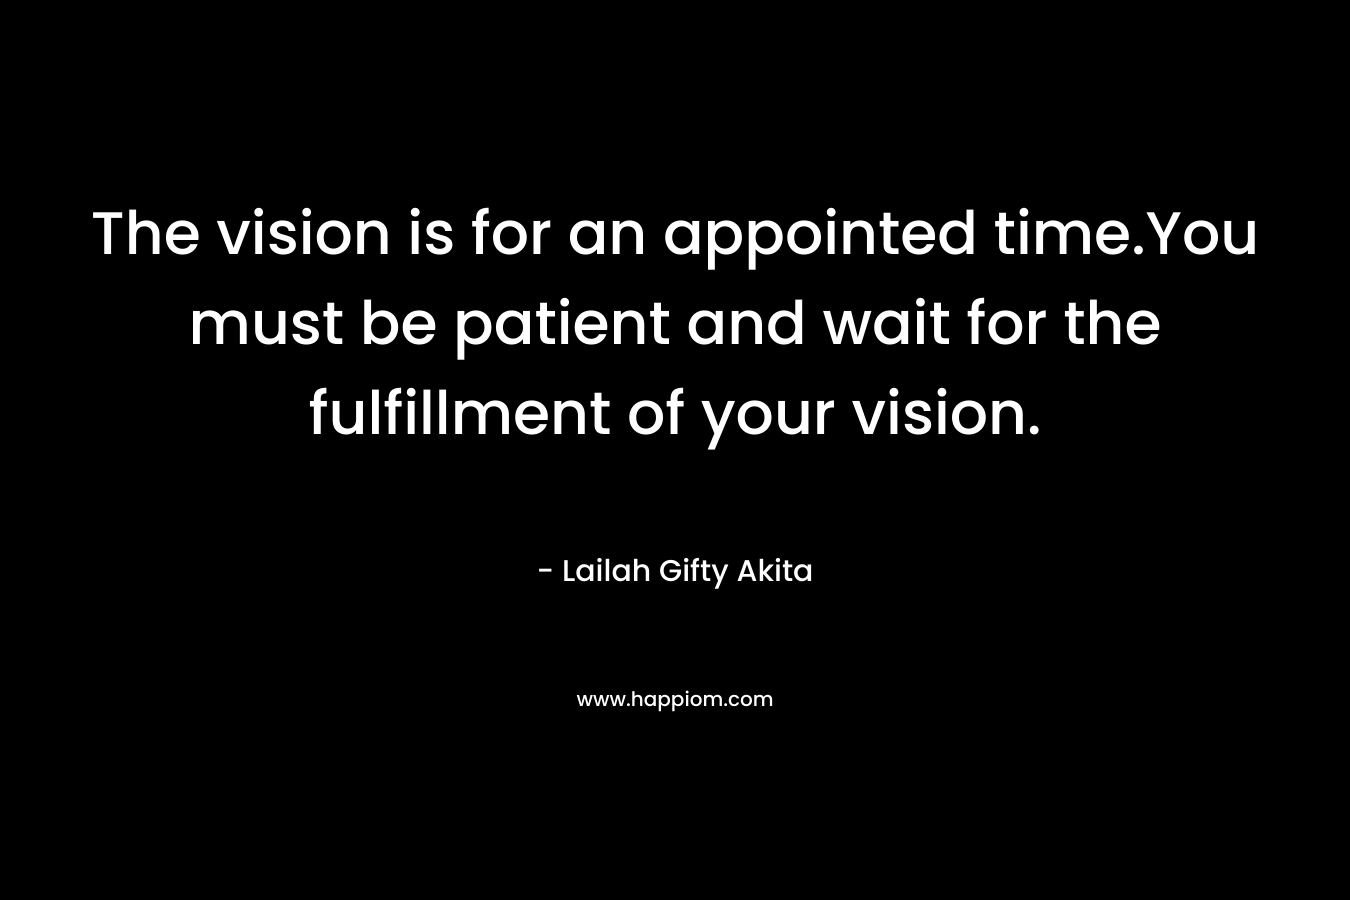 The vision is for an appointed time.You must be patient and wait for the fulfillment of your vision.